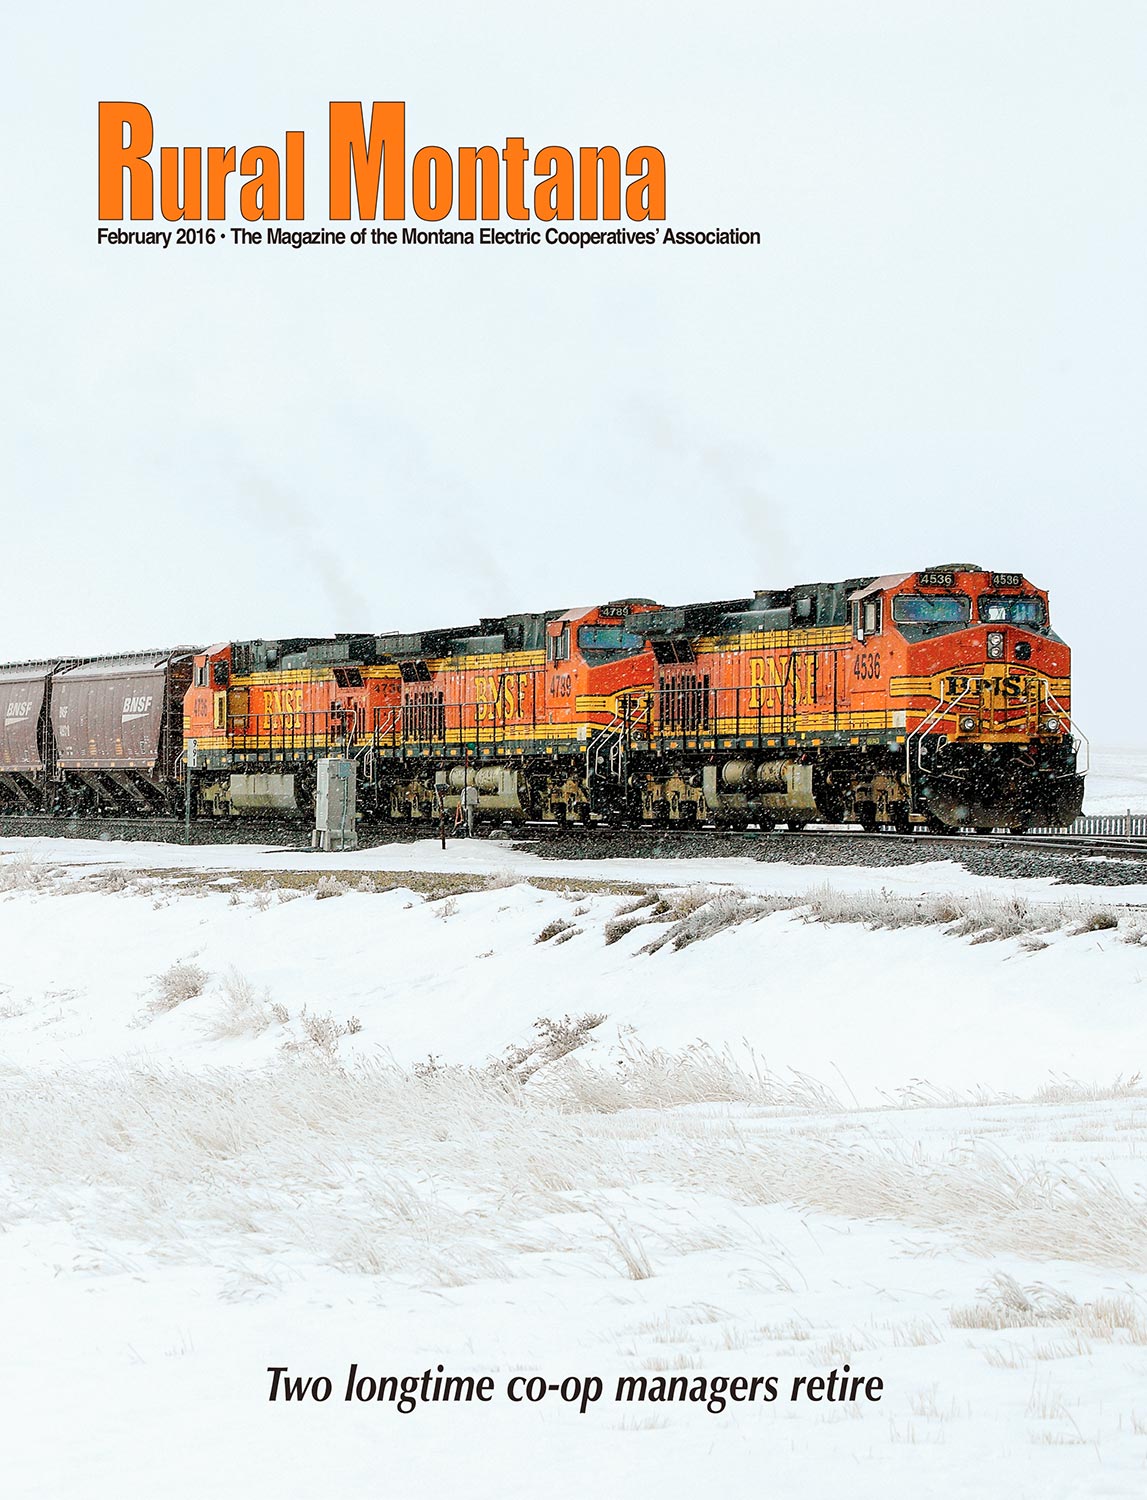 My photo of a train chugging through Rudyard, Montana appears on the cover of the February 2016 issue of Rural Montana magazine.&nbsp;→ Buy a Print